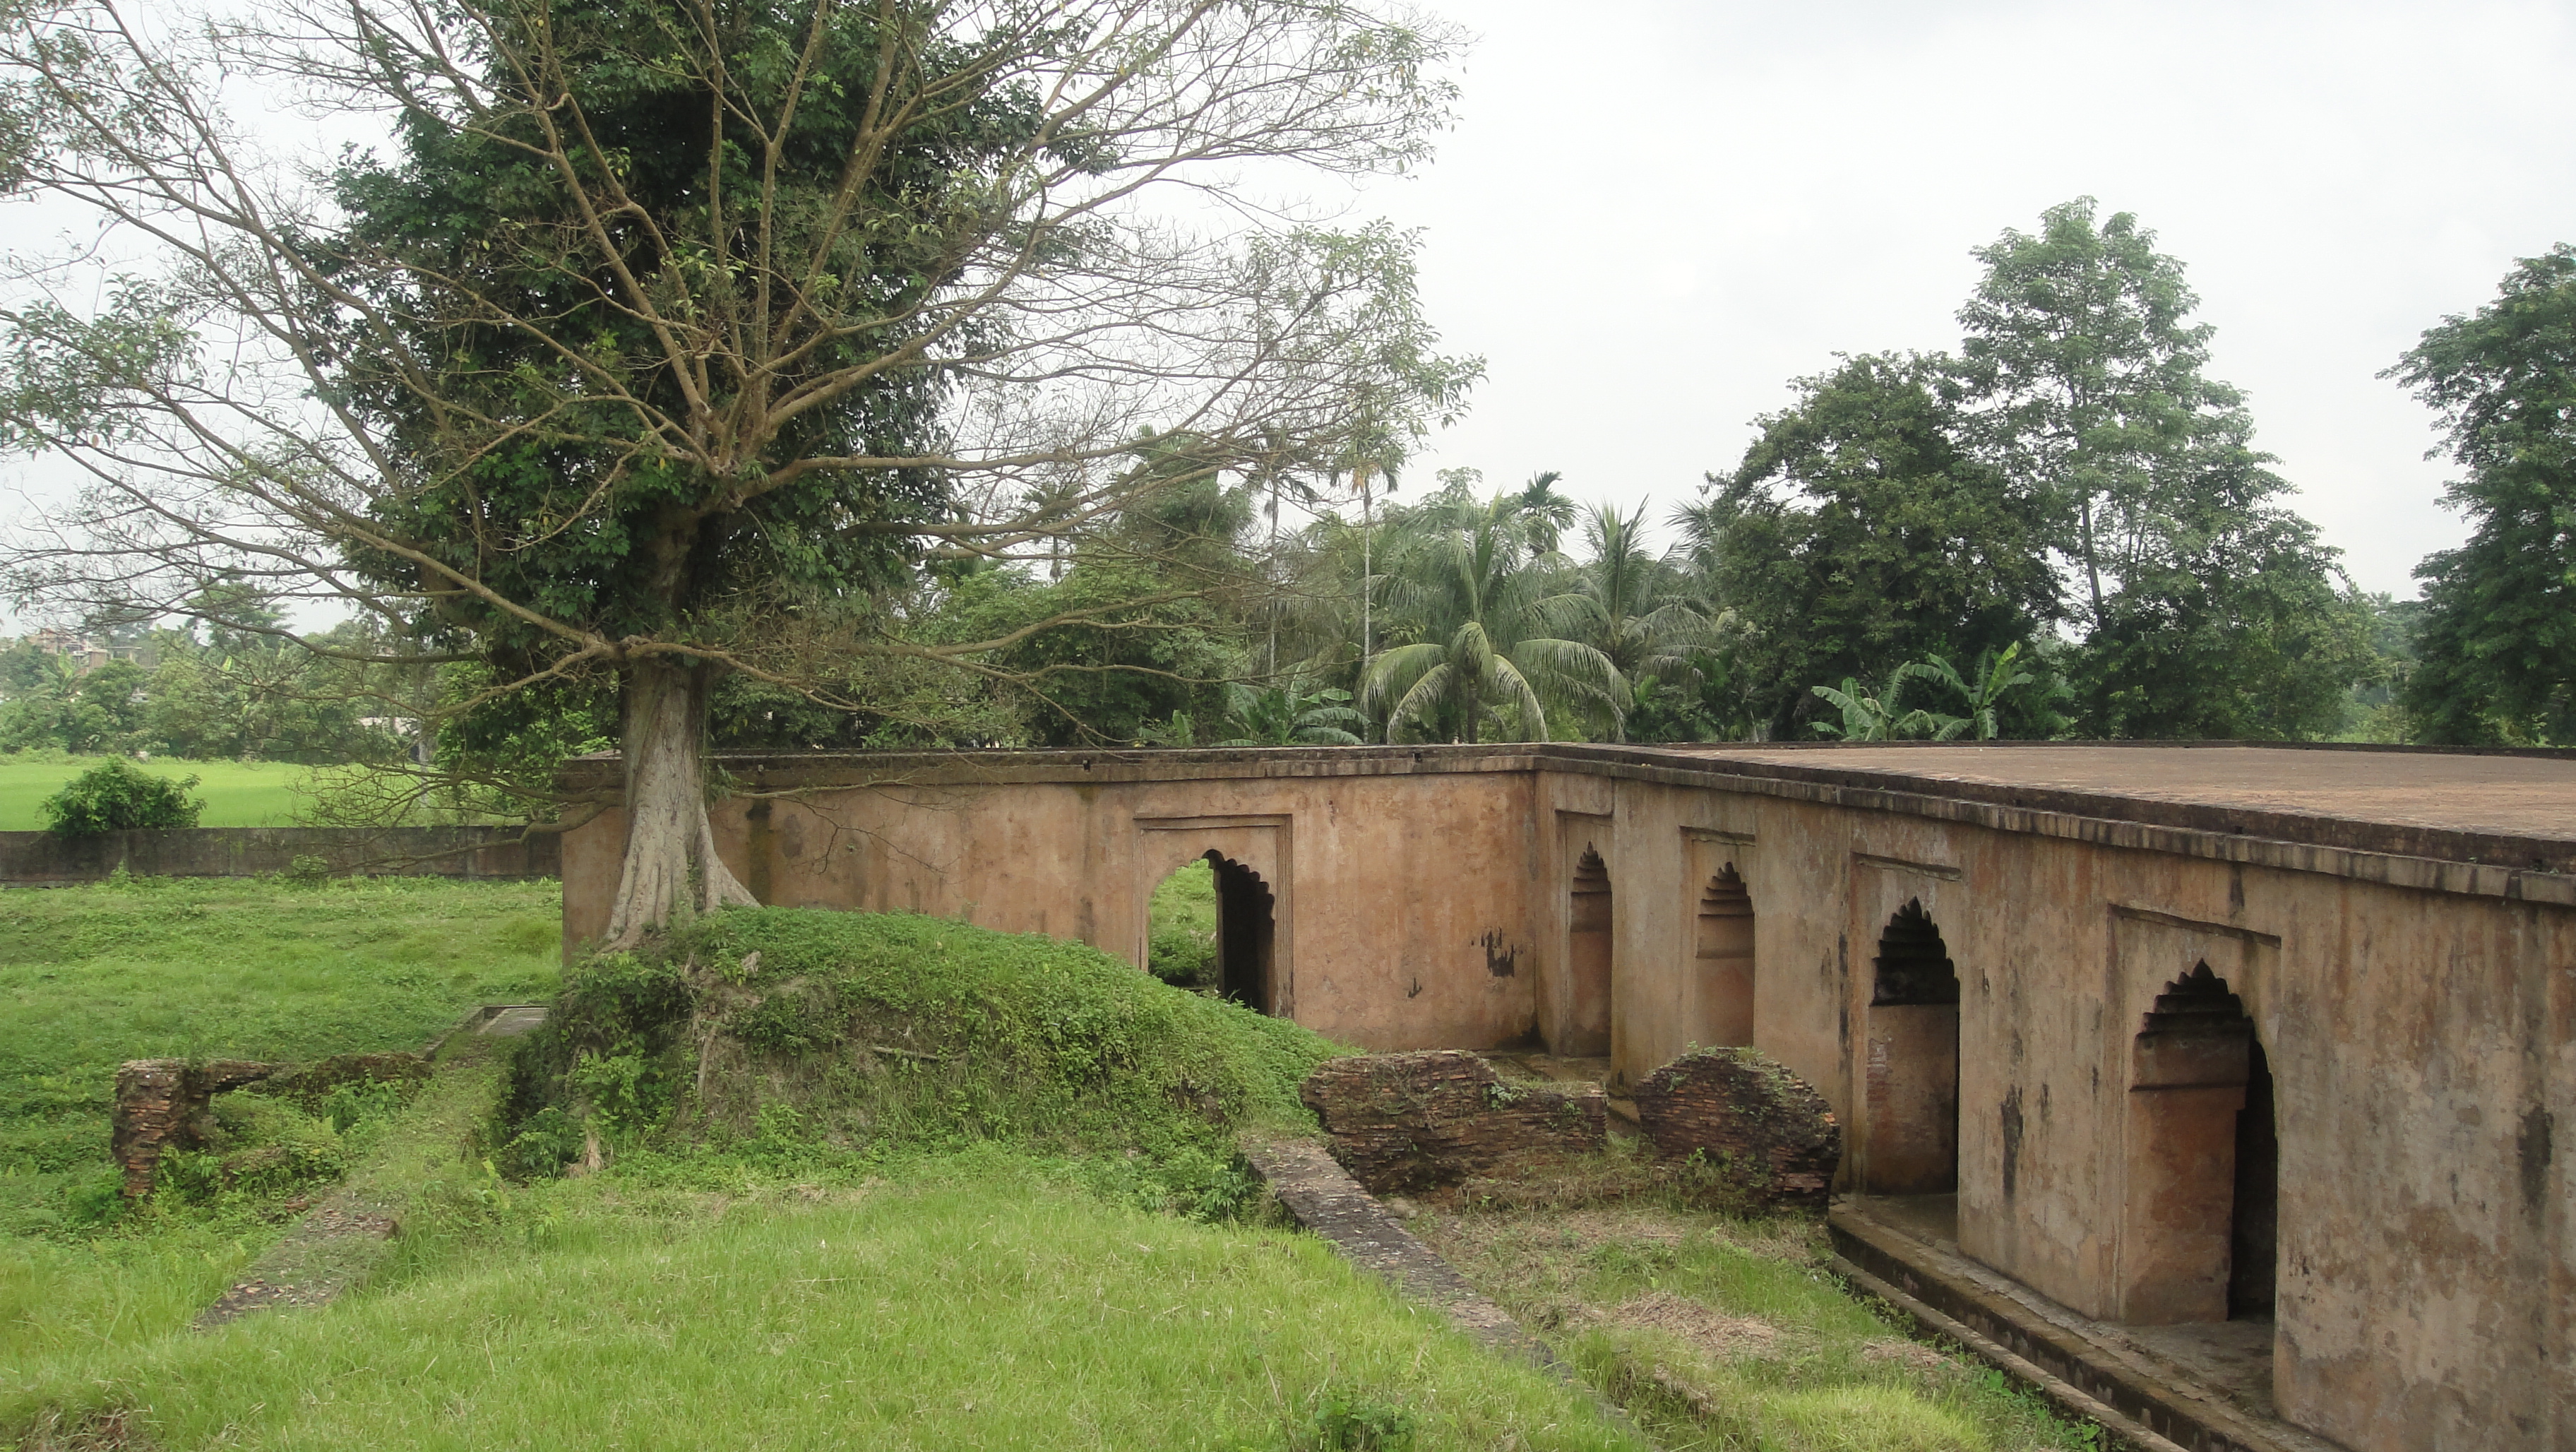 An ancient fort which has been abandon for decades.